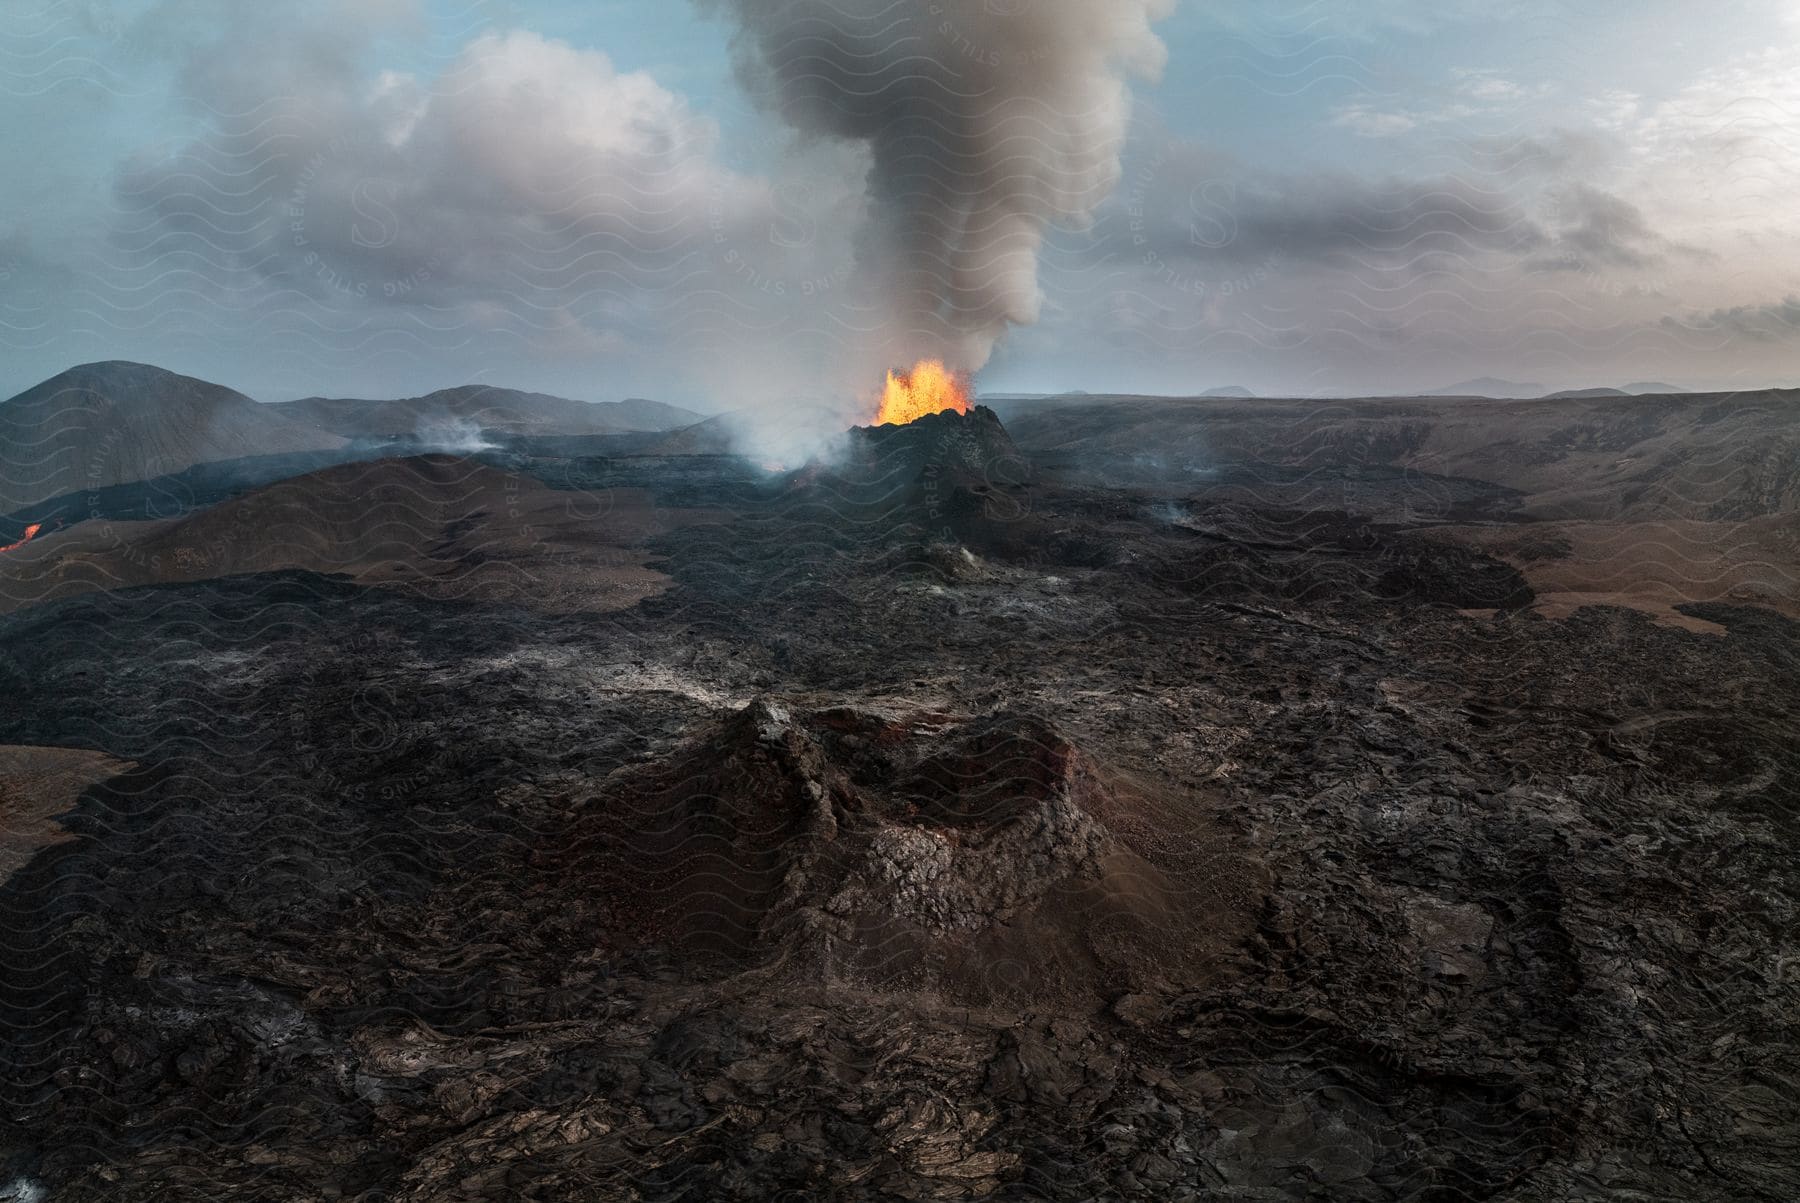 A volcano erupting in a rocky mountain plateau